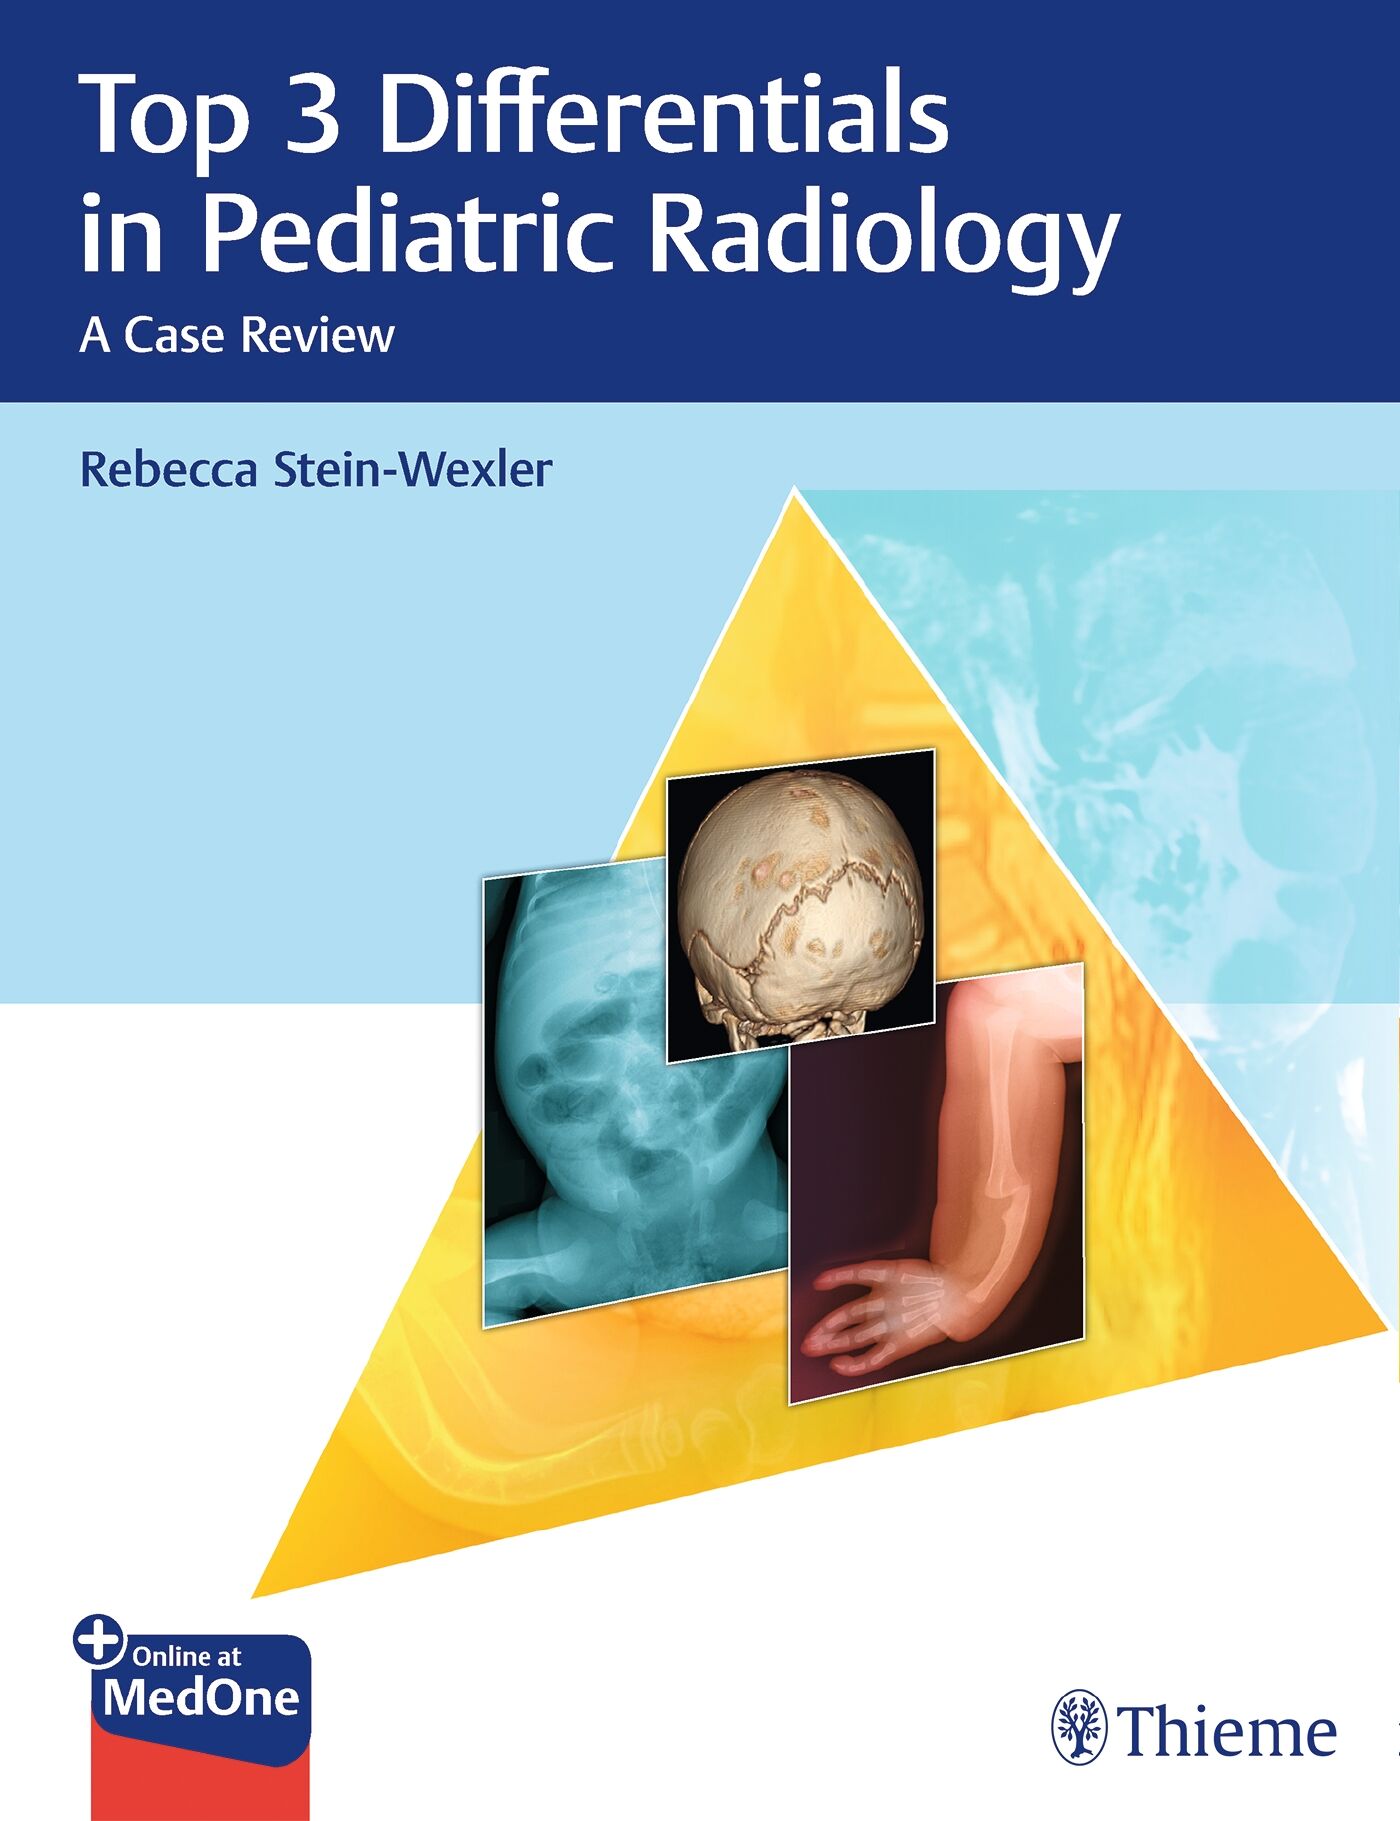 Top 3 Differentials in Pediatric Radiology, 9781626233706